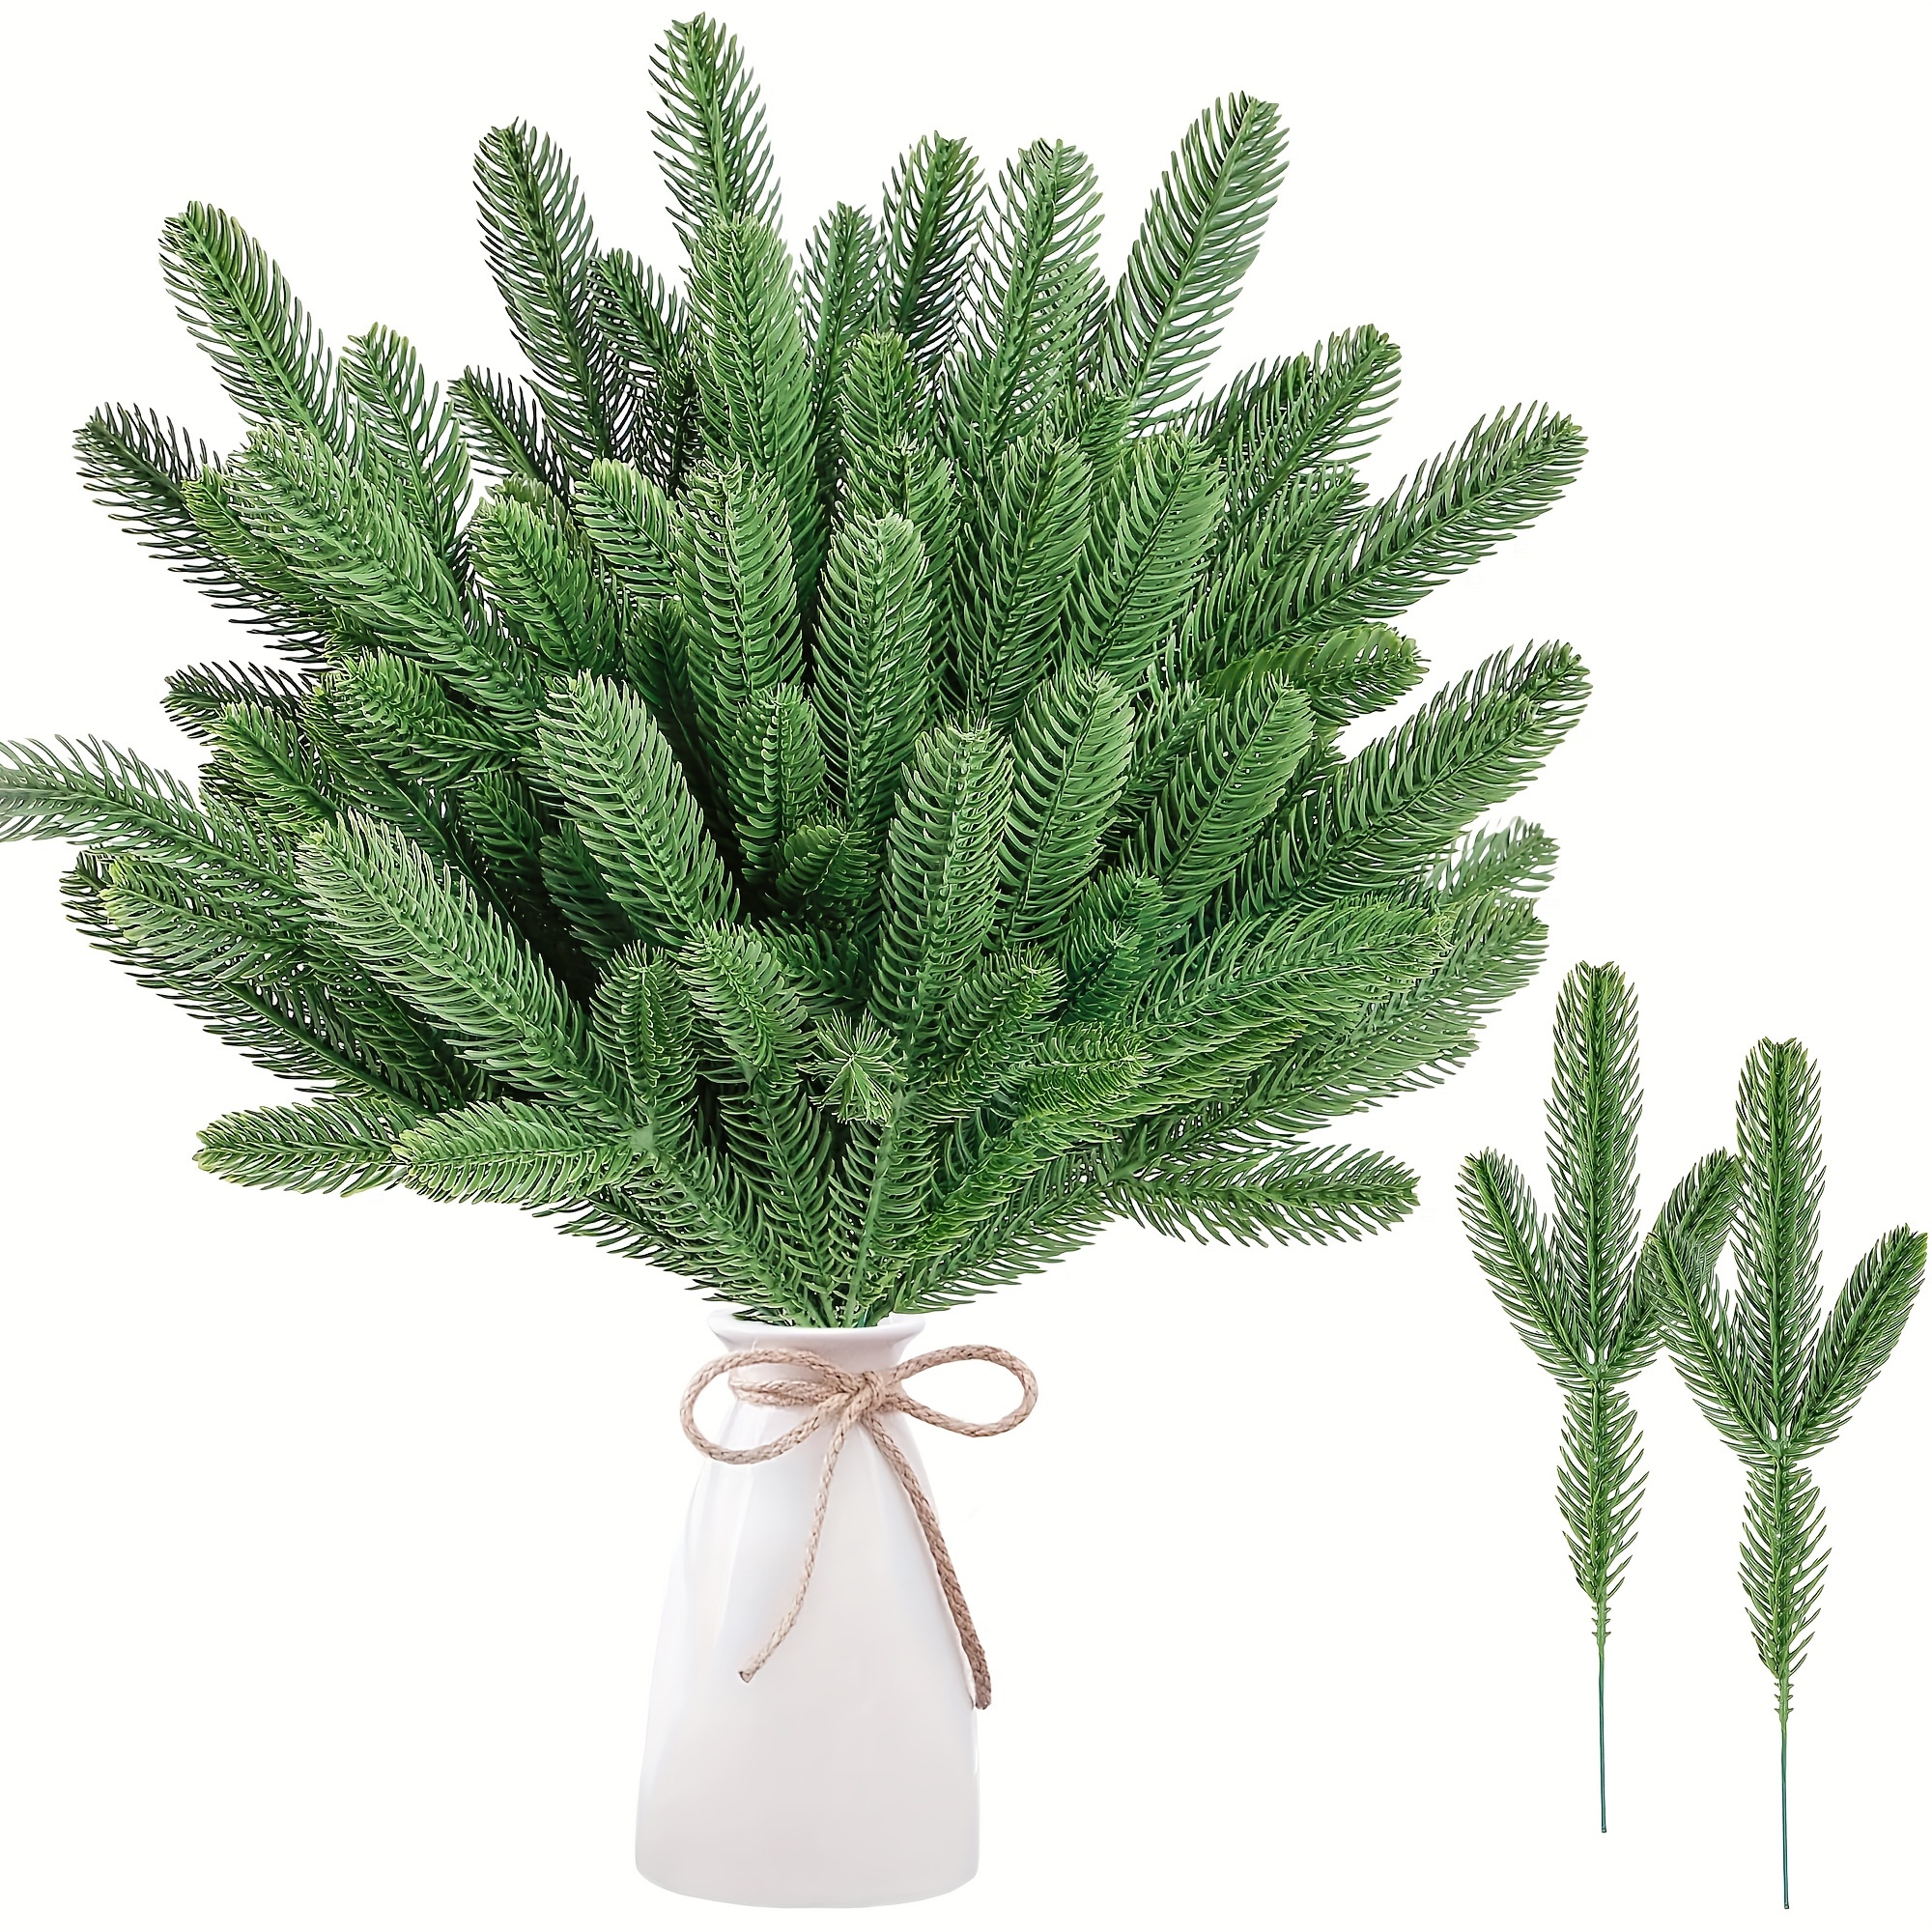 Galand Christmas Artificial Pine Branches for Decorating,Fake Greenery Pine  Picks Green Plant Pendant for DIY Garland,Christmas Wreath Decorations